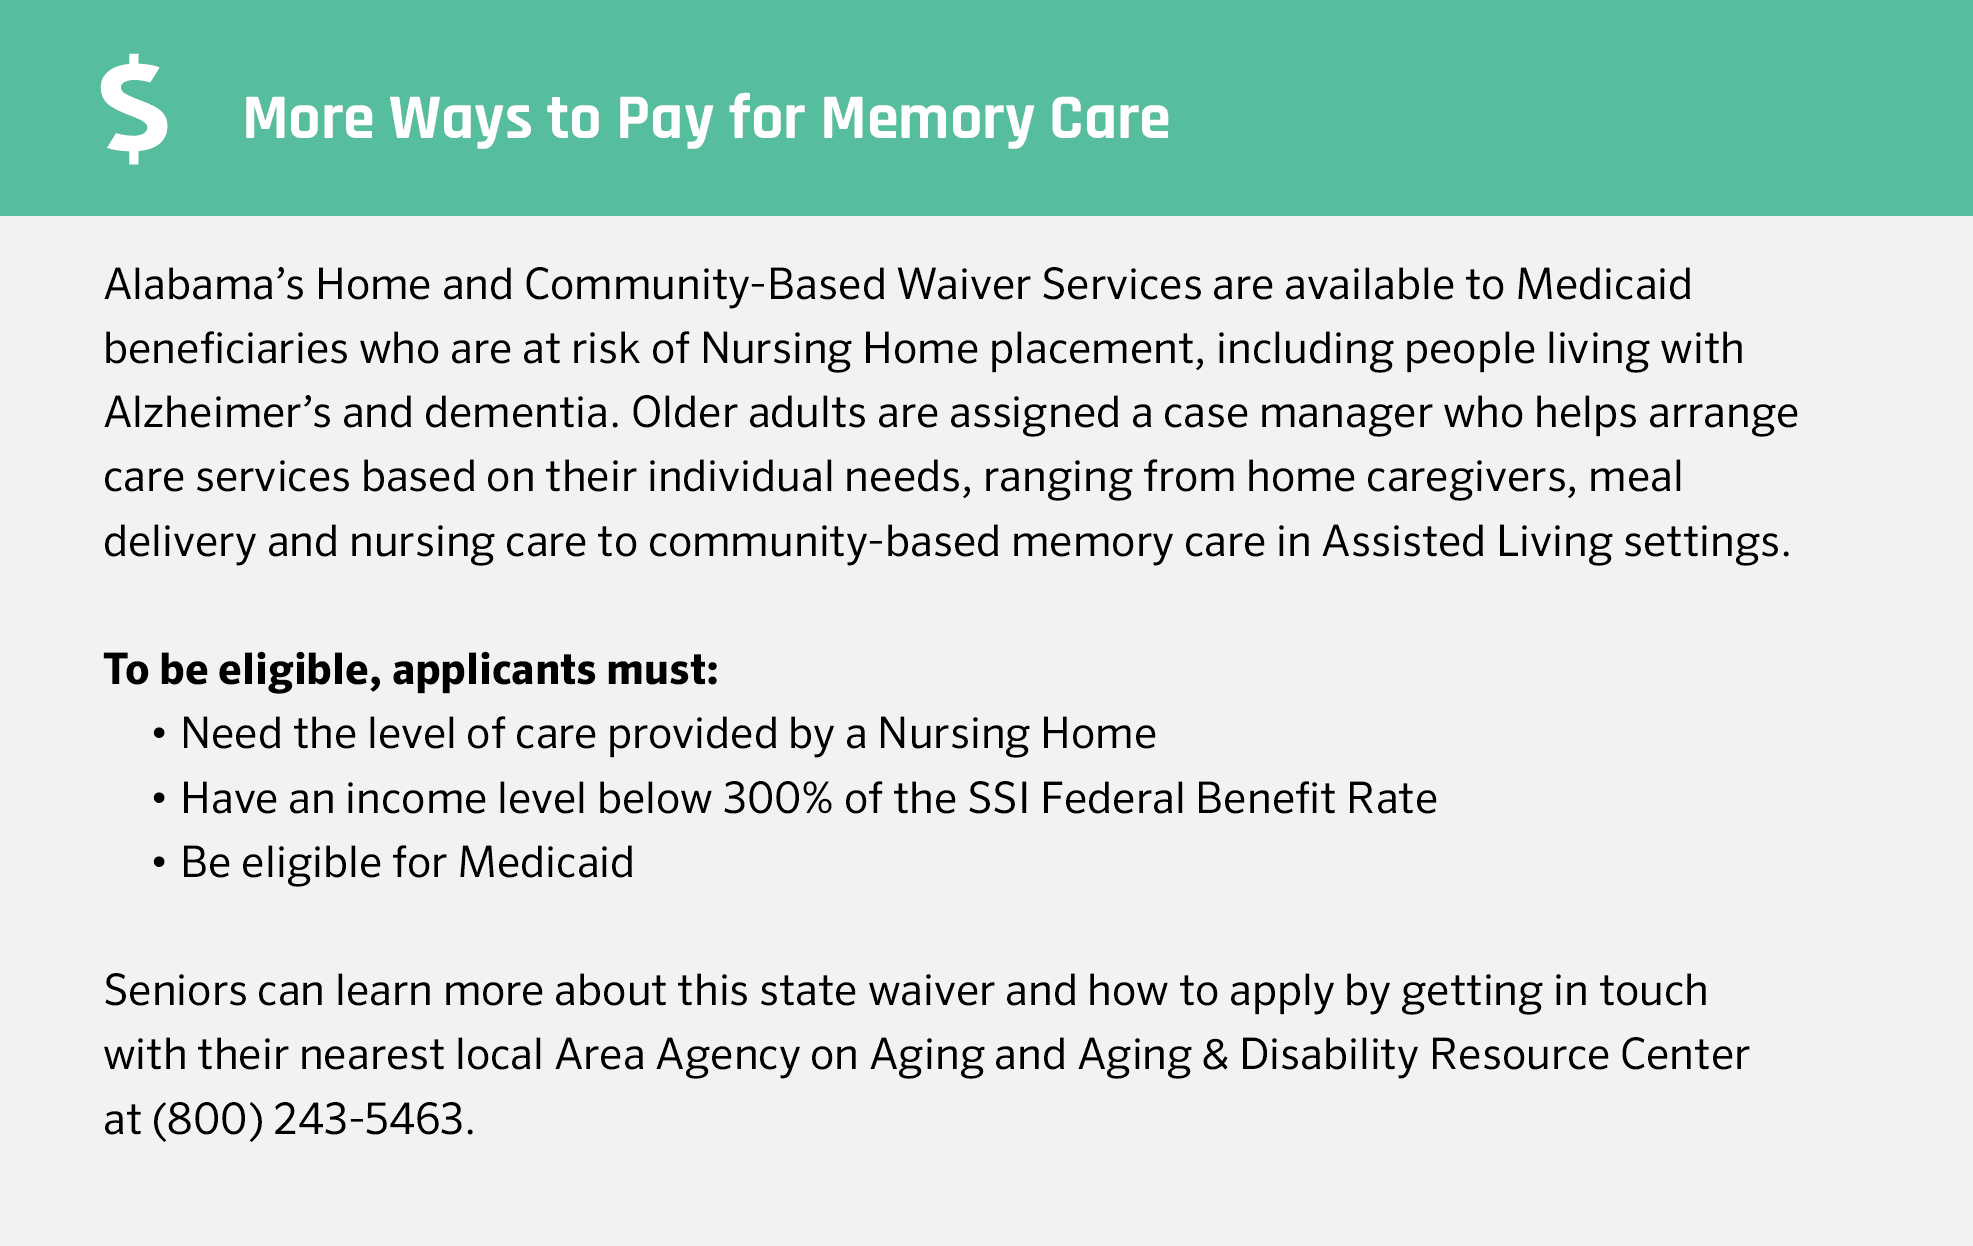 Financial Assistance for Memory Care in Alabama